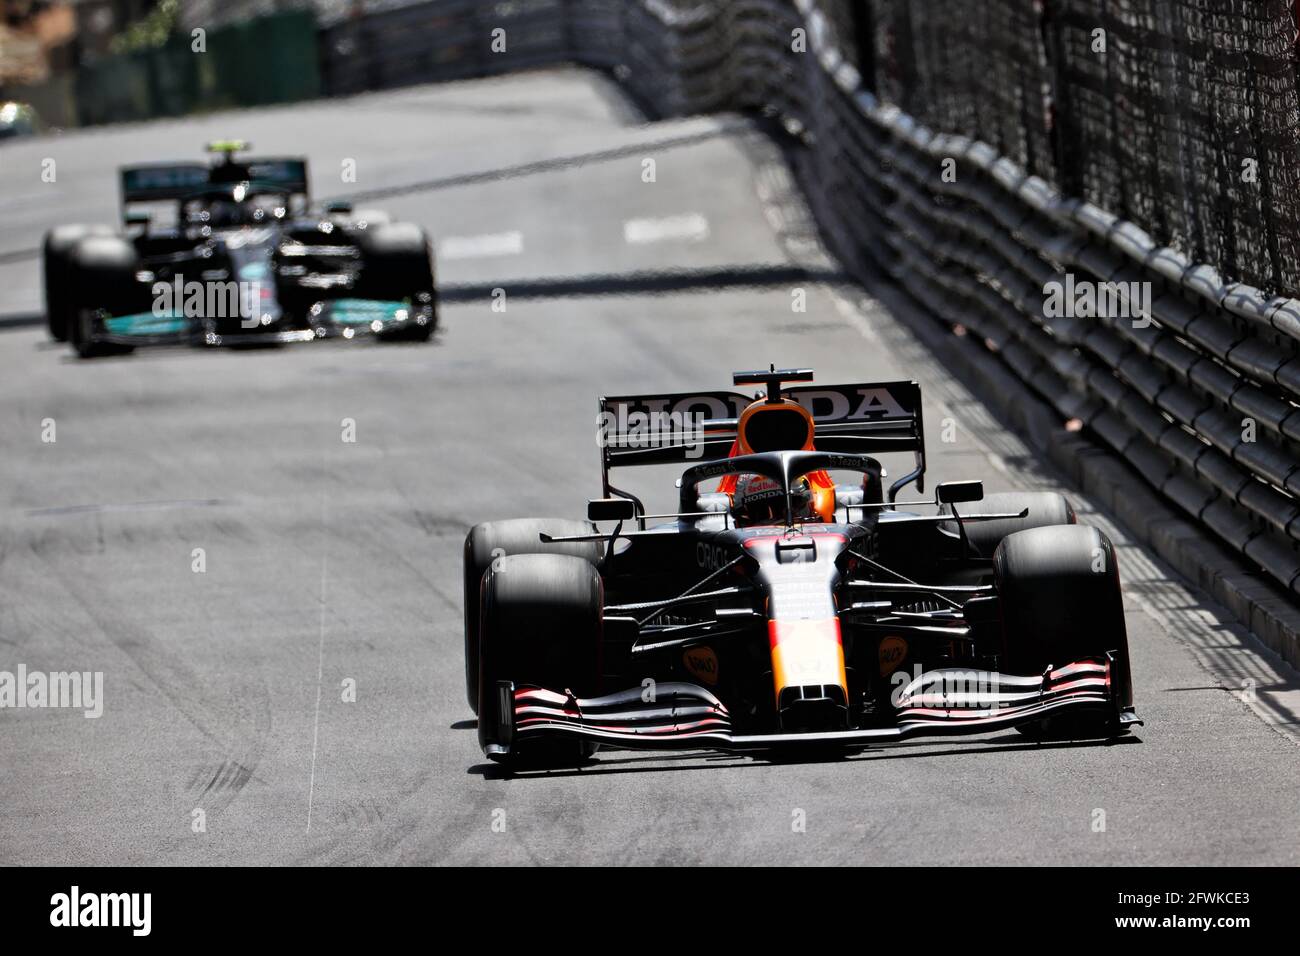 Max Verstappen Monaco High Resolution Stock Photography And Images Alamy